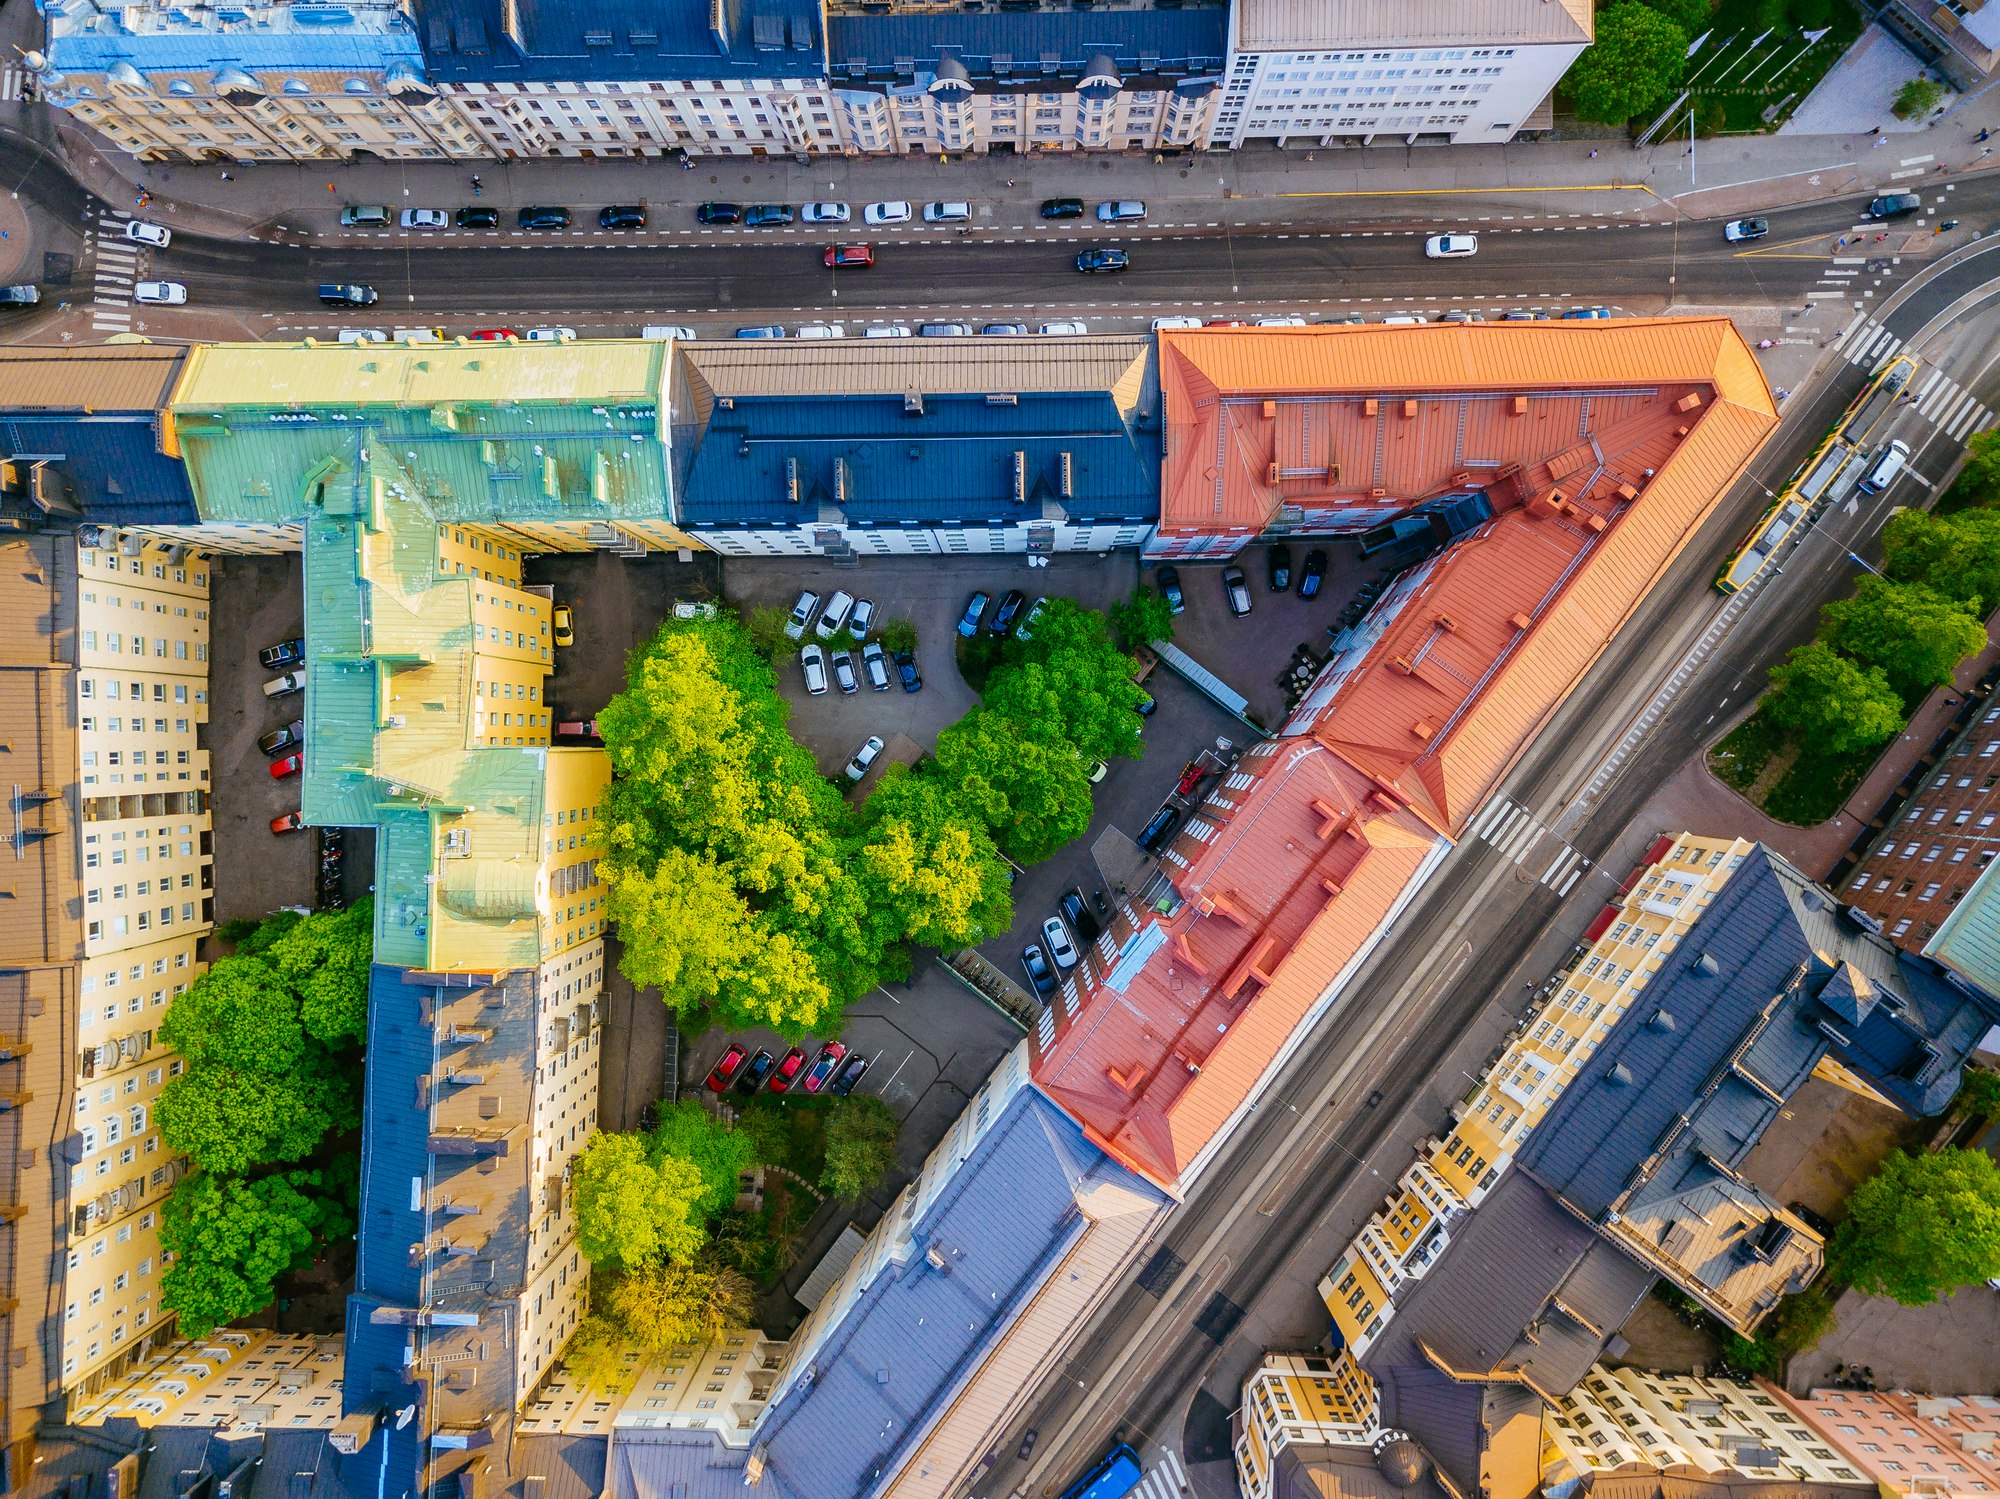 Top-down view of streets, multi-colored rooftops and inner courtyards of old residential buildings in downtown Helsinki